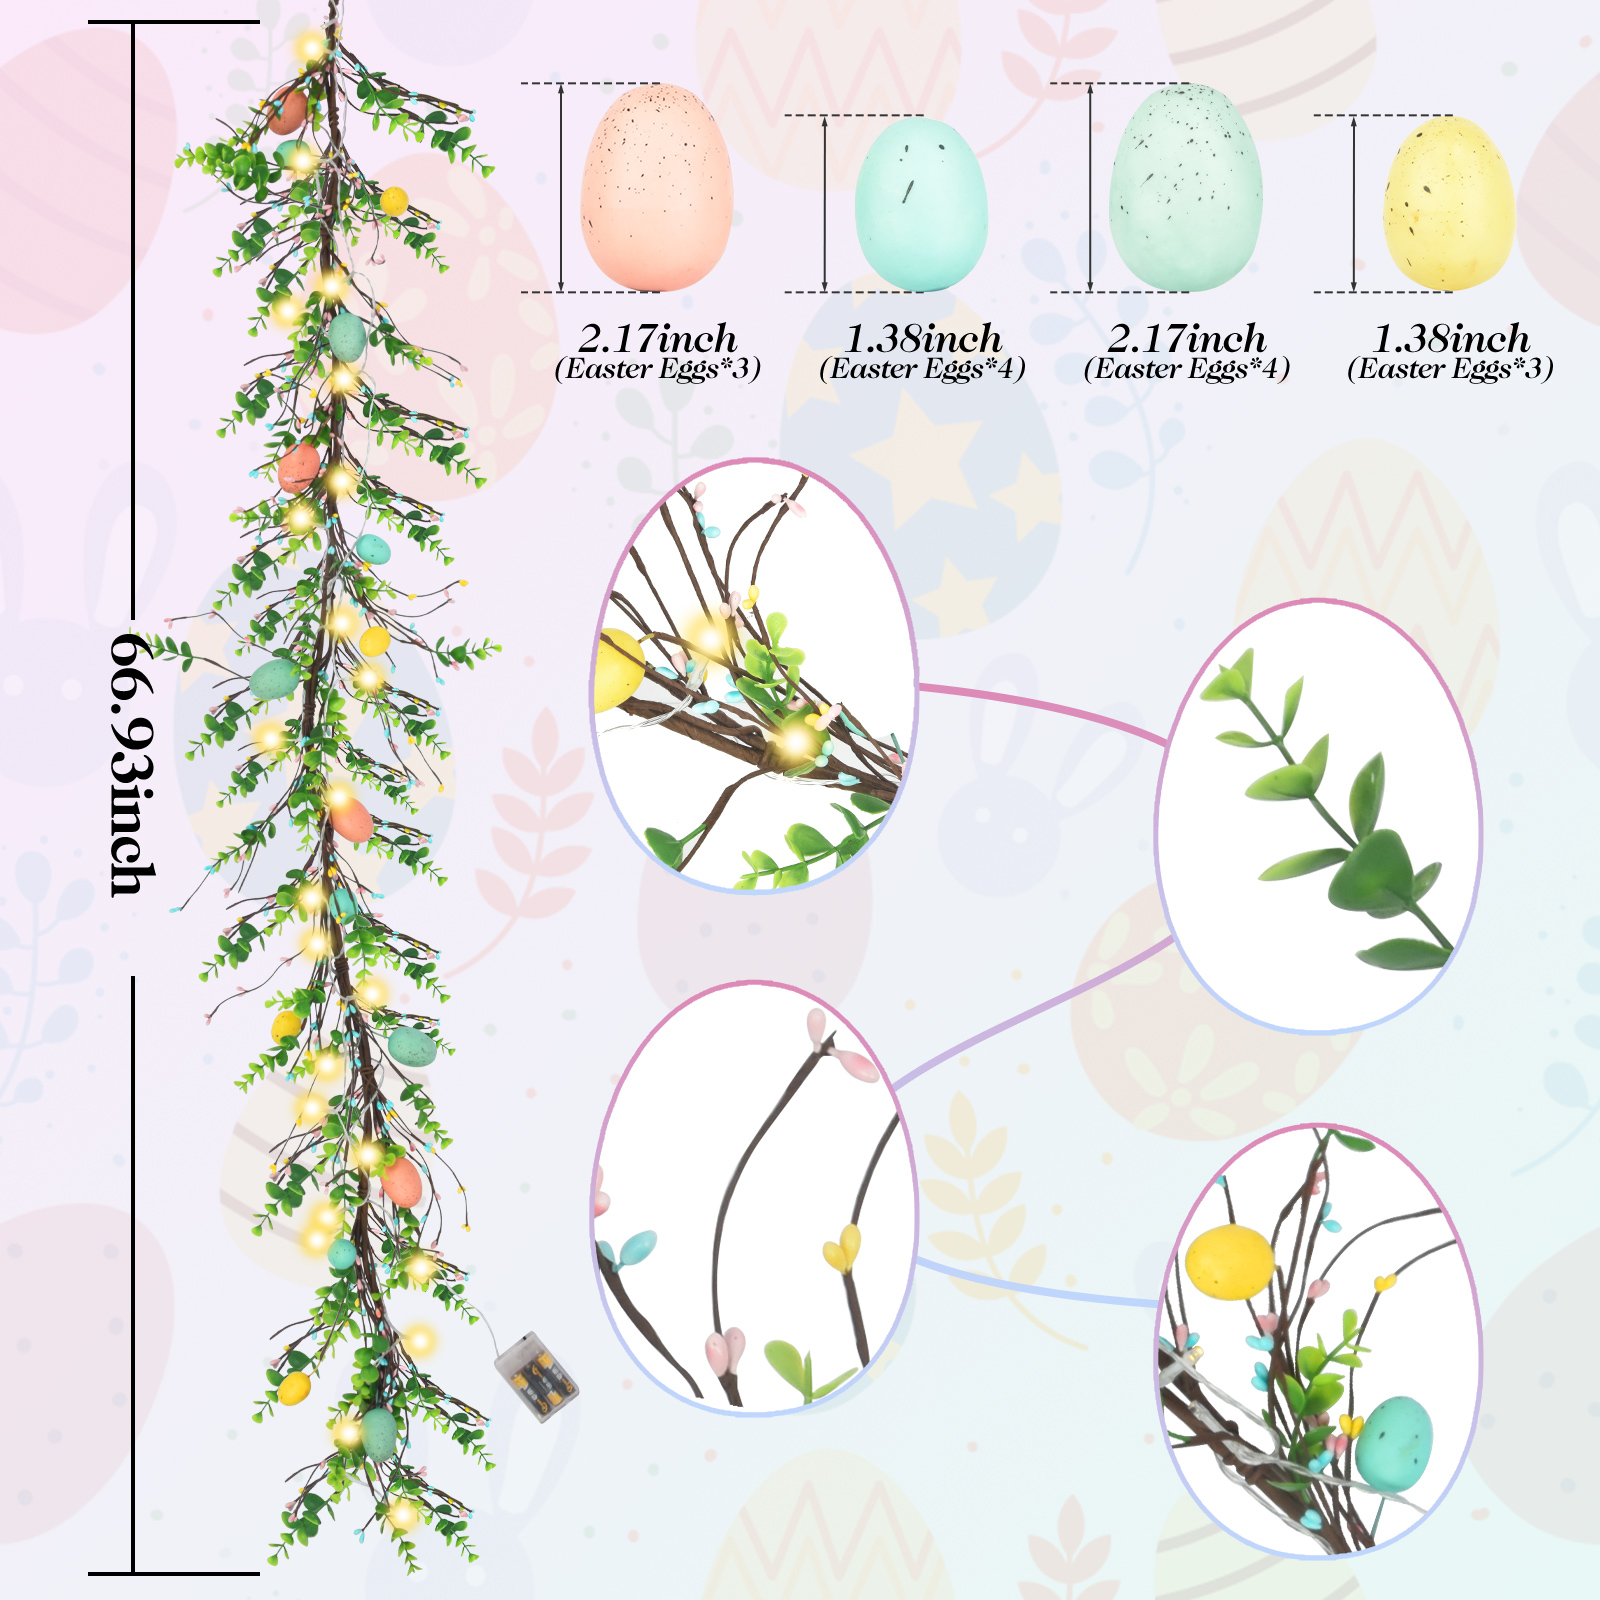 Easter Garland Spring Vine led Egg Light Rattan Artificial Eggs Garlands with Eucalyptus Leaf for Arch Home Holiday Party Mantle Fireplace Indoor Outdoor Festive Front Porch Decor - image 2 of 9